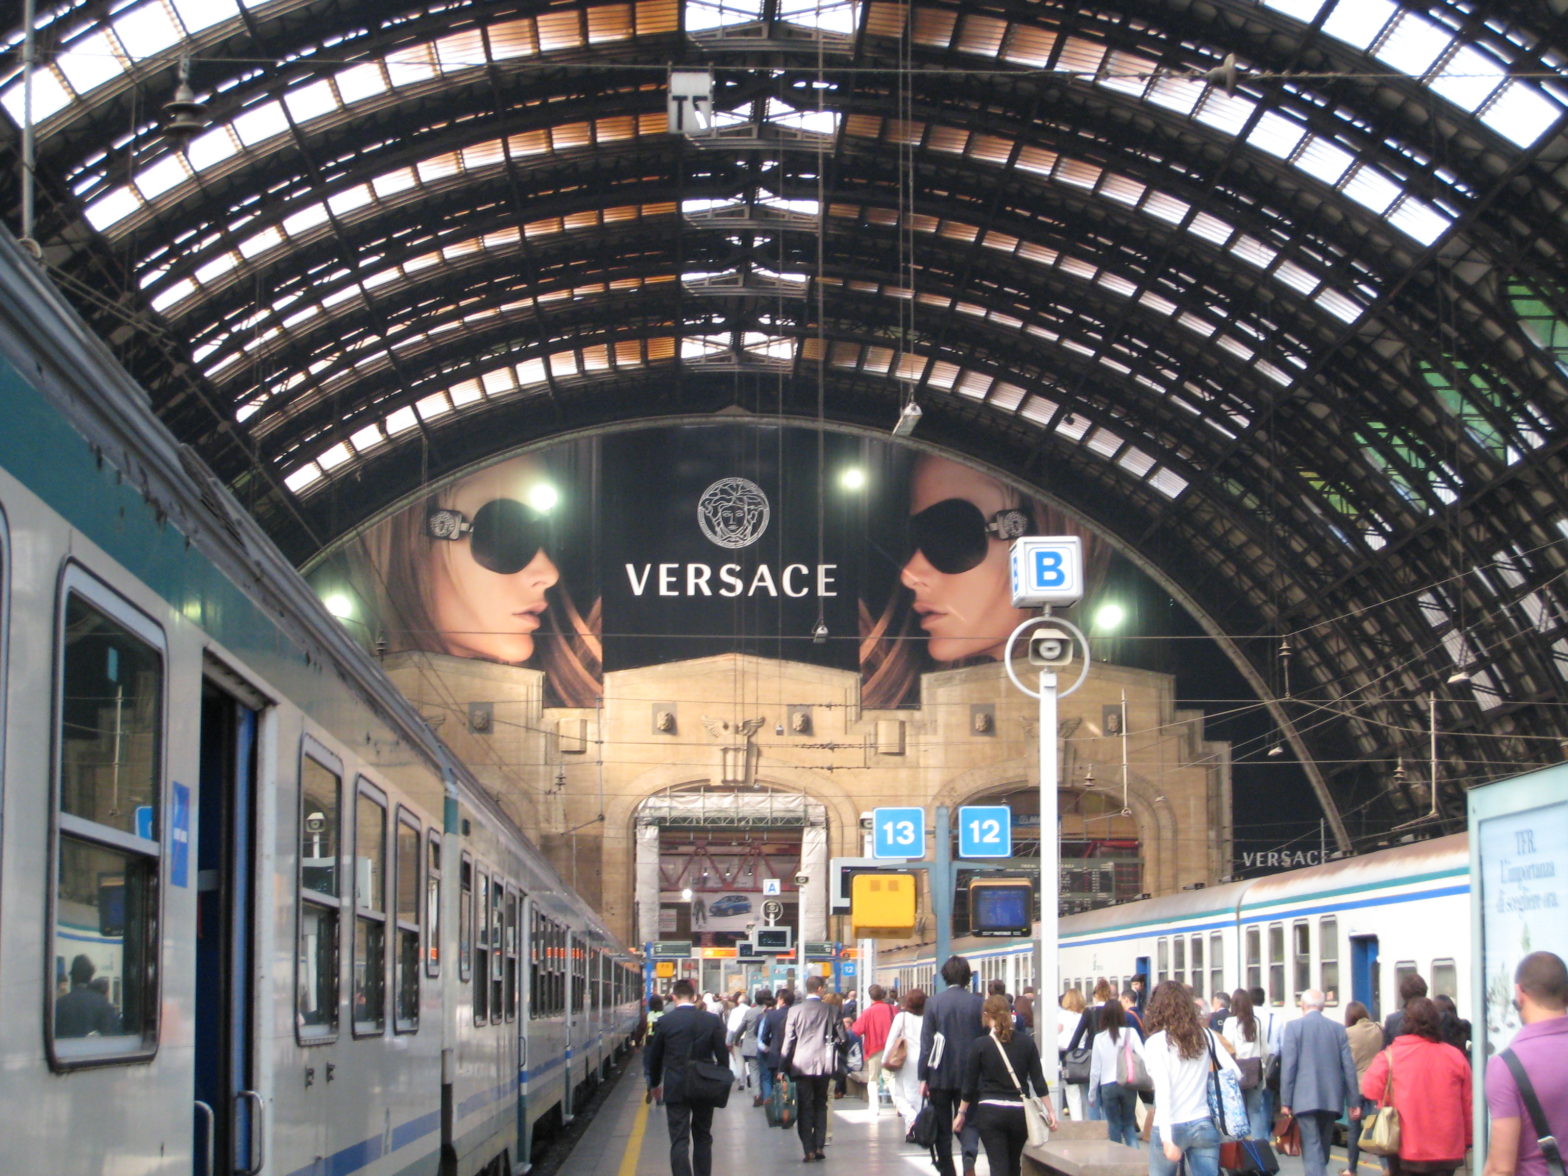 Milan Central Station, view from platform to main station with large Versace ad near the ceiling